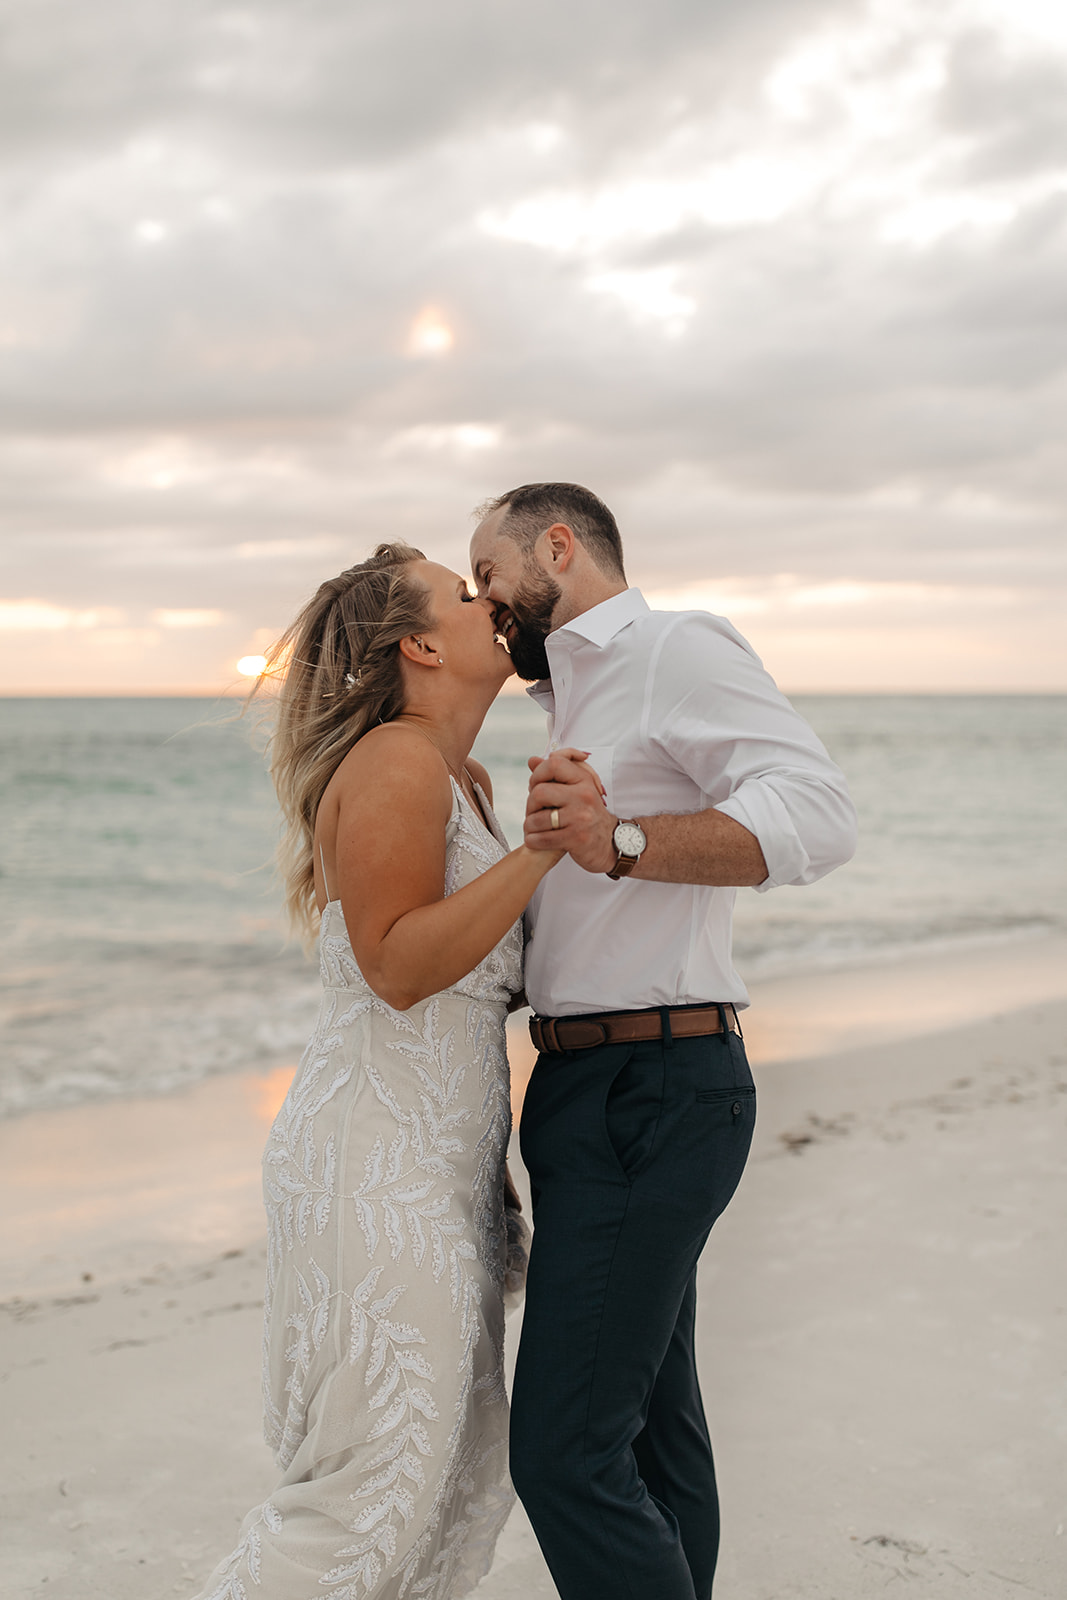 The bride and groom sway together at their beach elopement